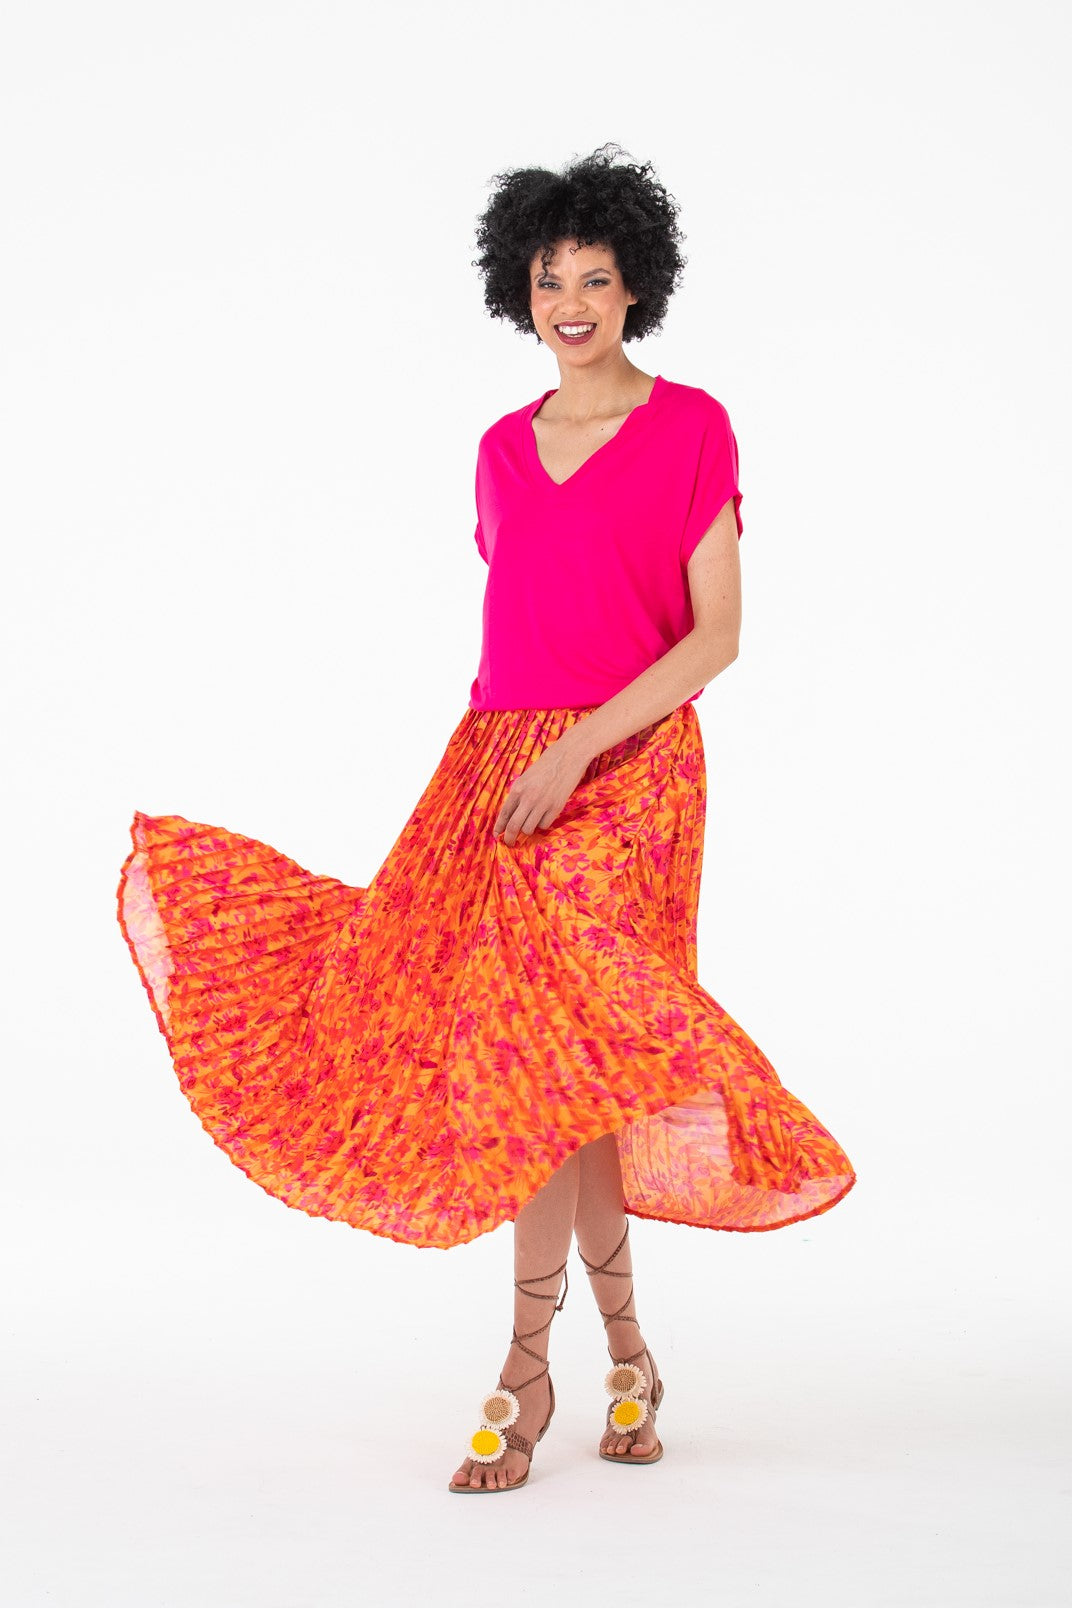 Stella pleated skirt - Orange and pink floral